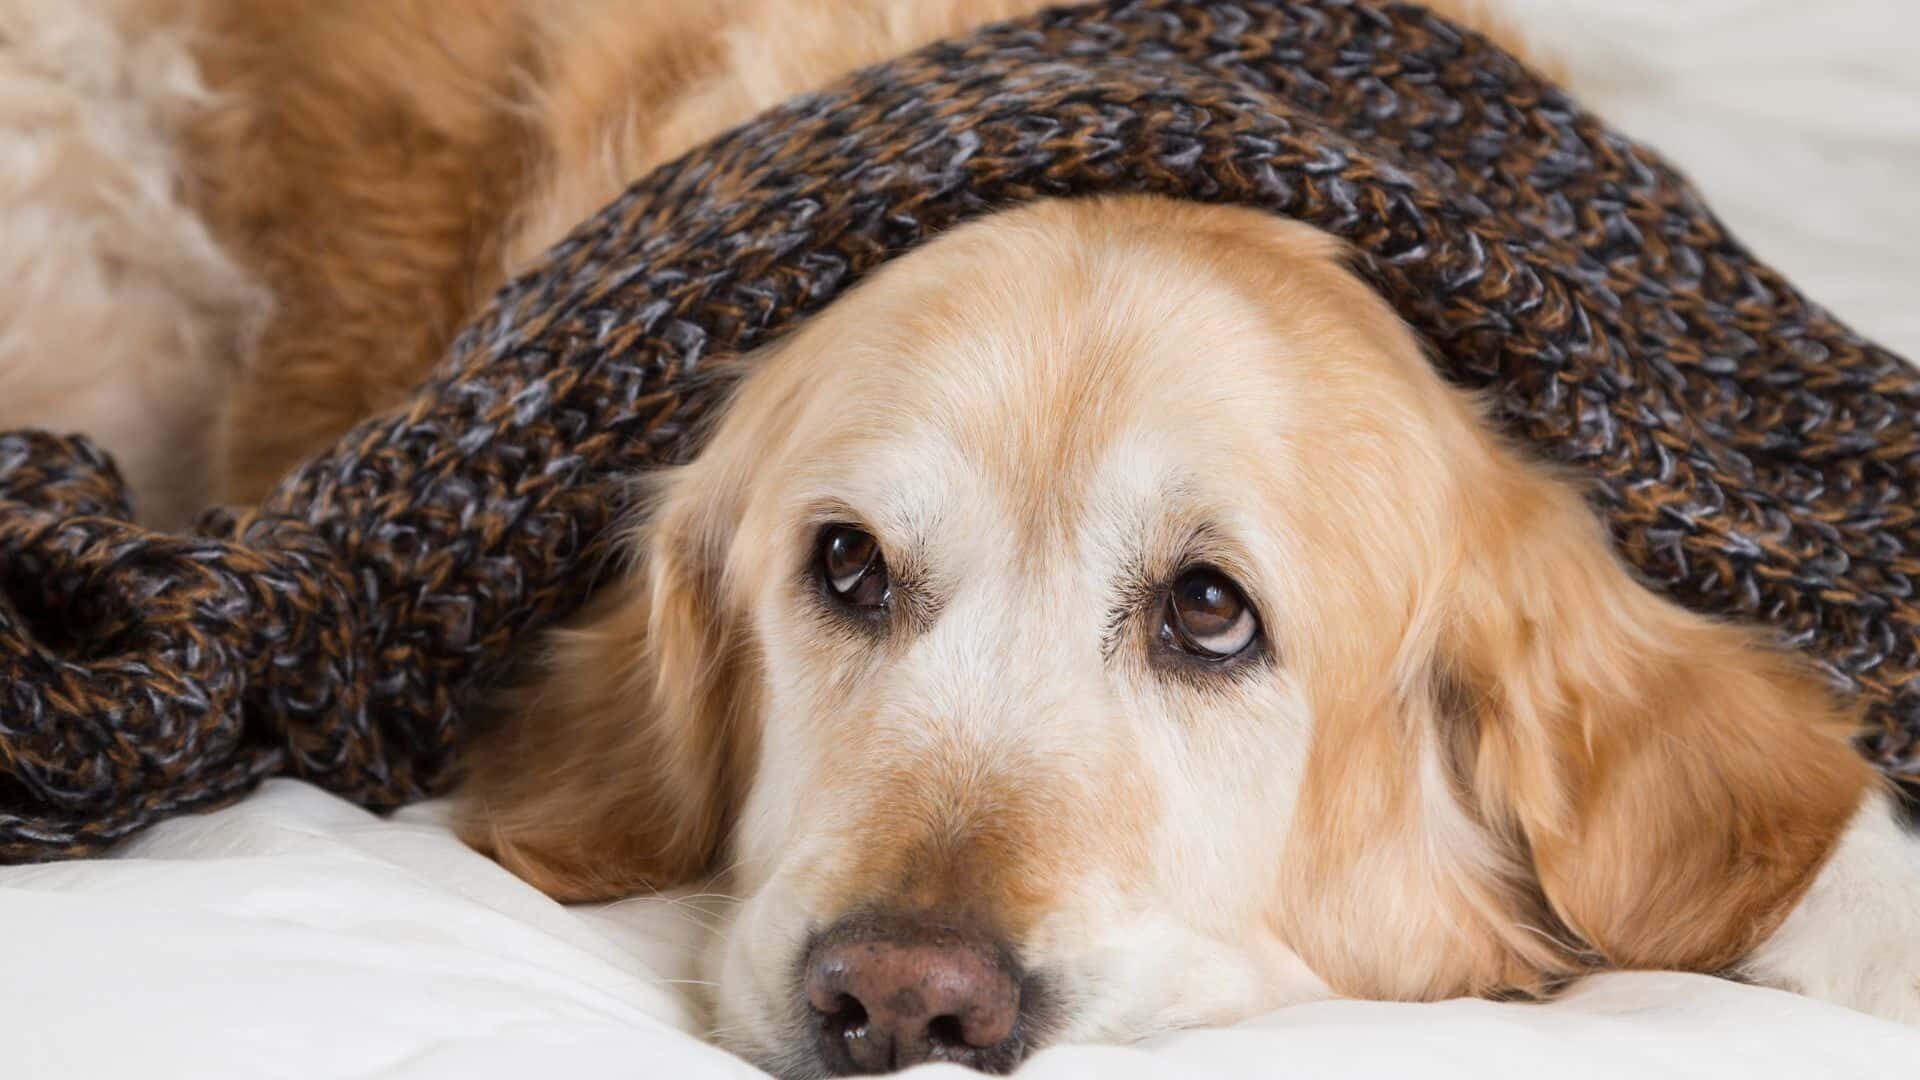 Symptoms of a dog with cold